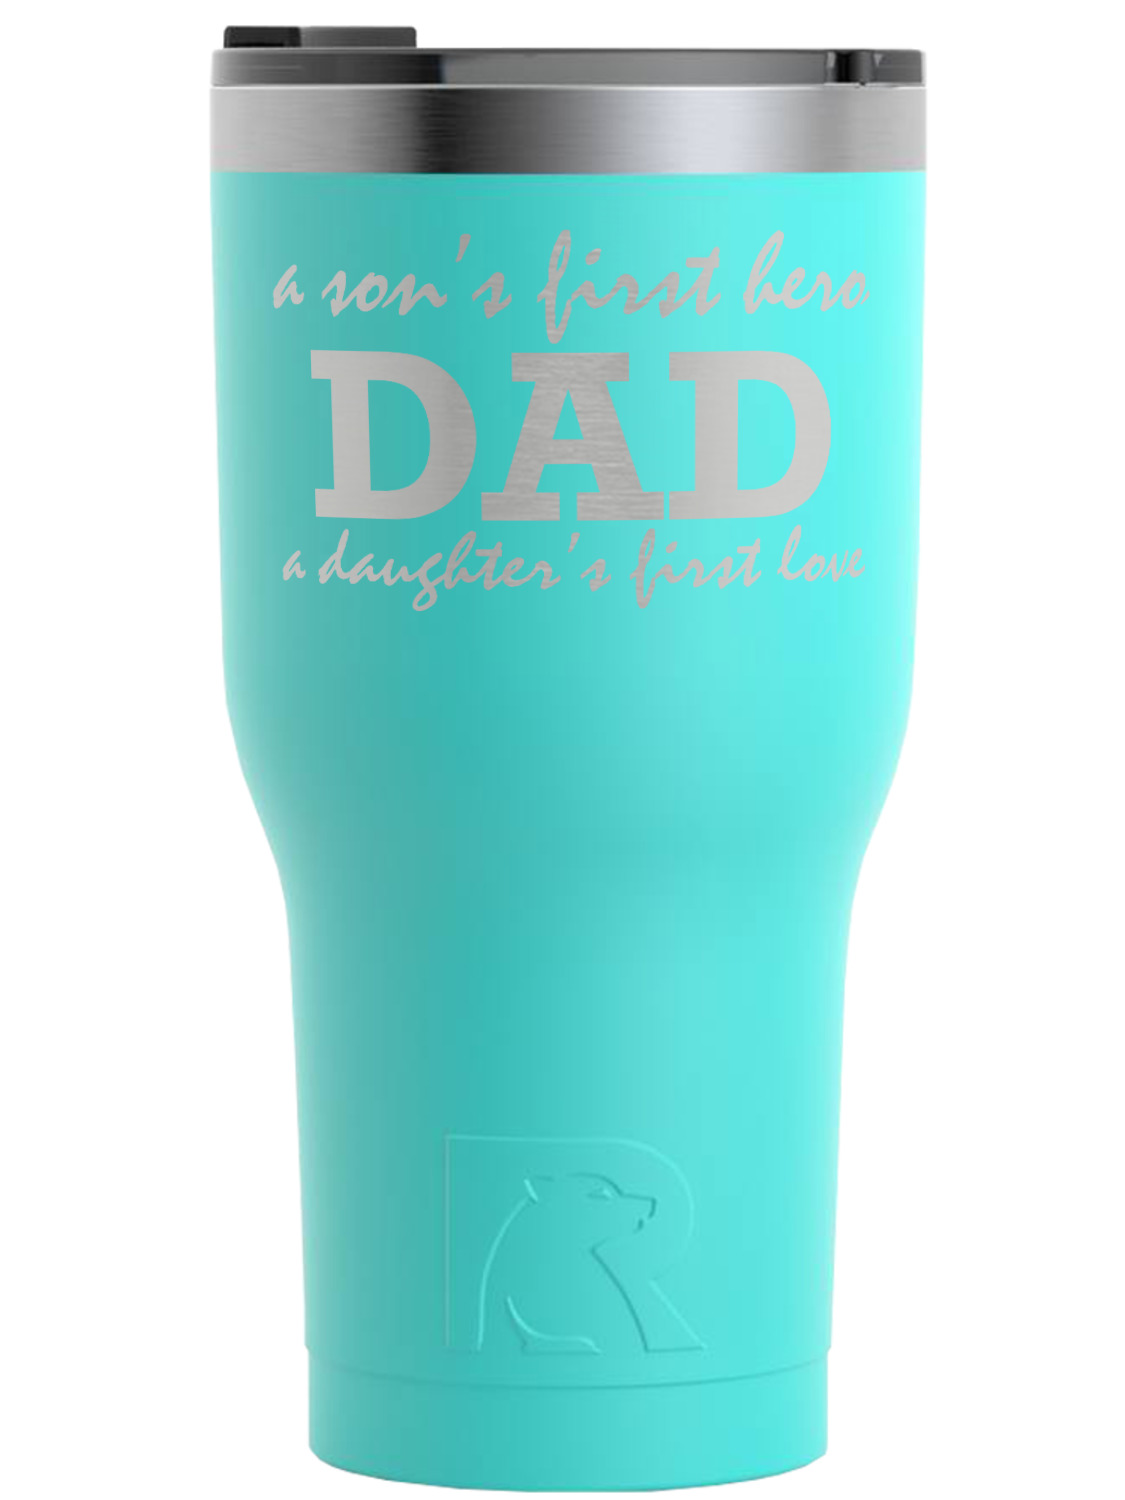 https://www.youcustomizeit.com/common/MAKE/1018898/Father-Day-Quotes-Sayings-Teal-RTIC-Tumbler-Front-2.jpg?lm=1665683708